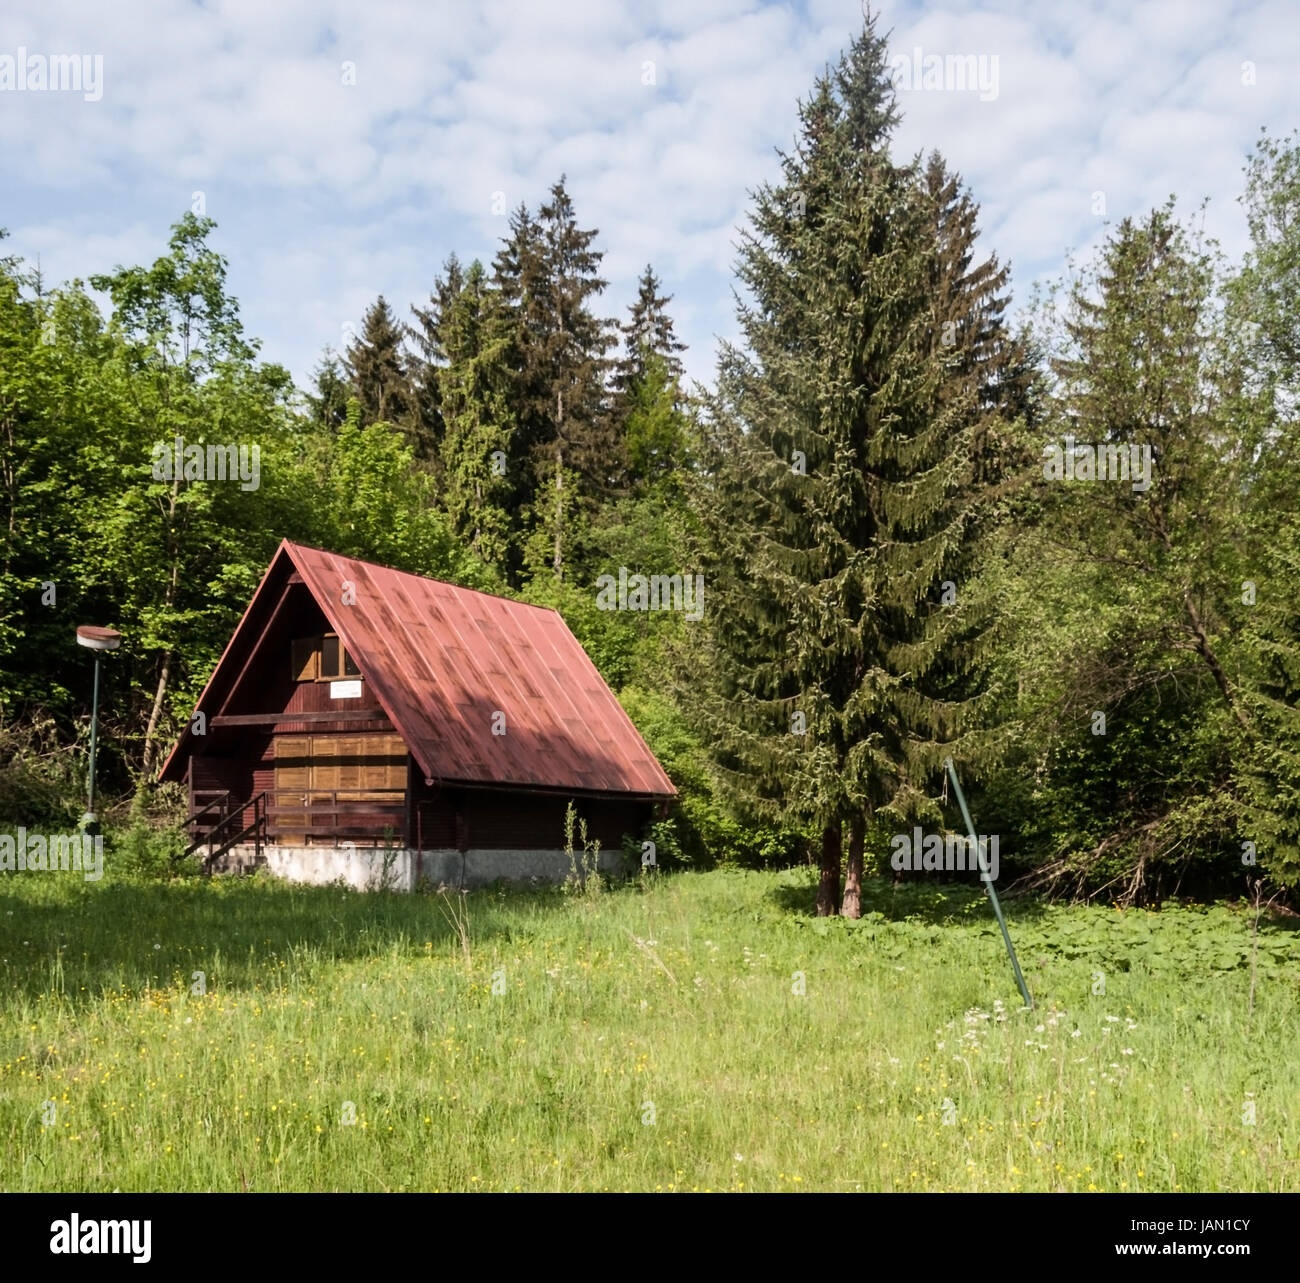 abandoned chalet on meadow with trees around and blue sky with clouds on Dierova settlement near Orava river and Kralovany city in Slovakia Stock Photo